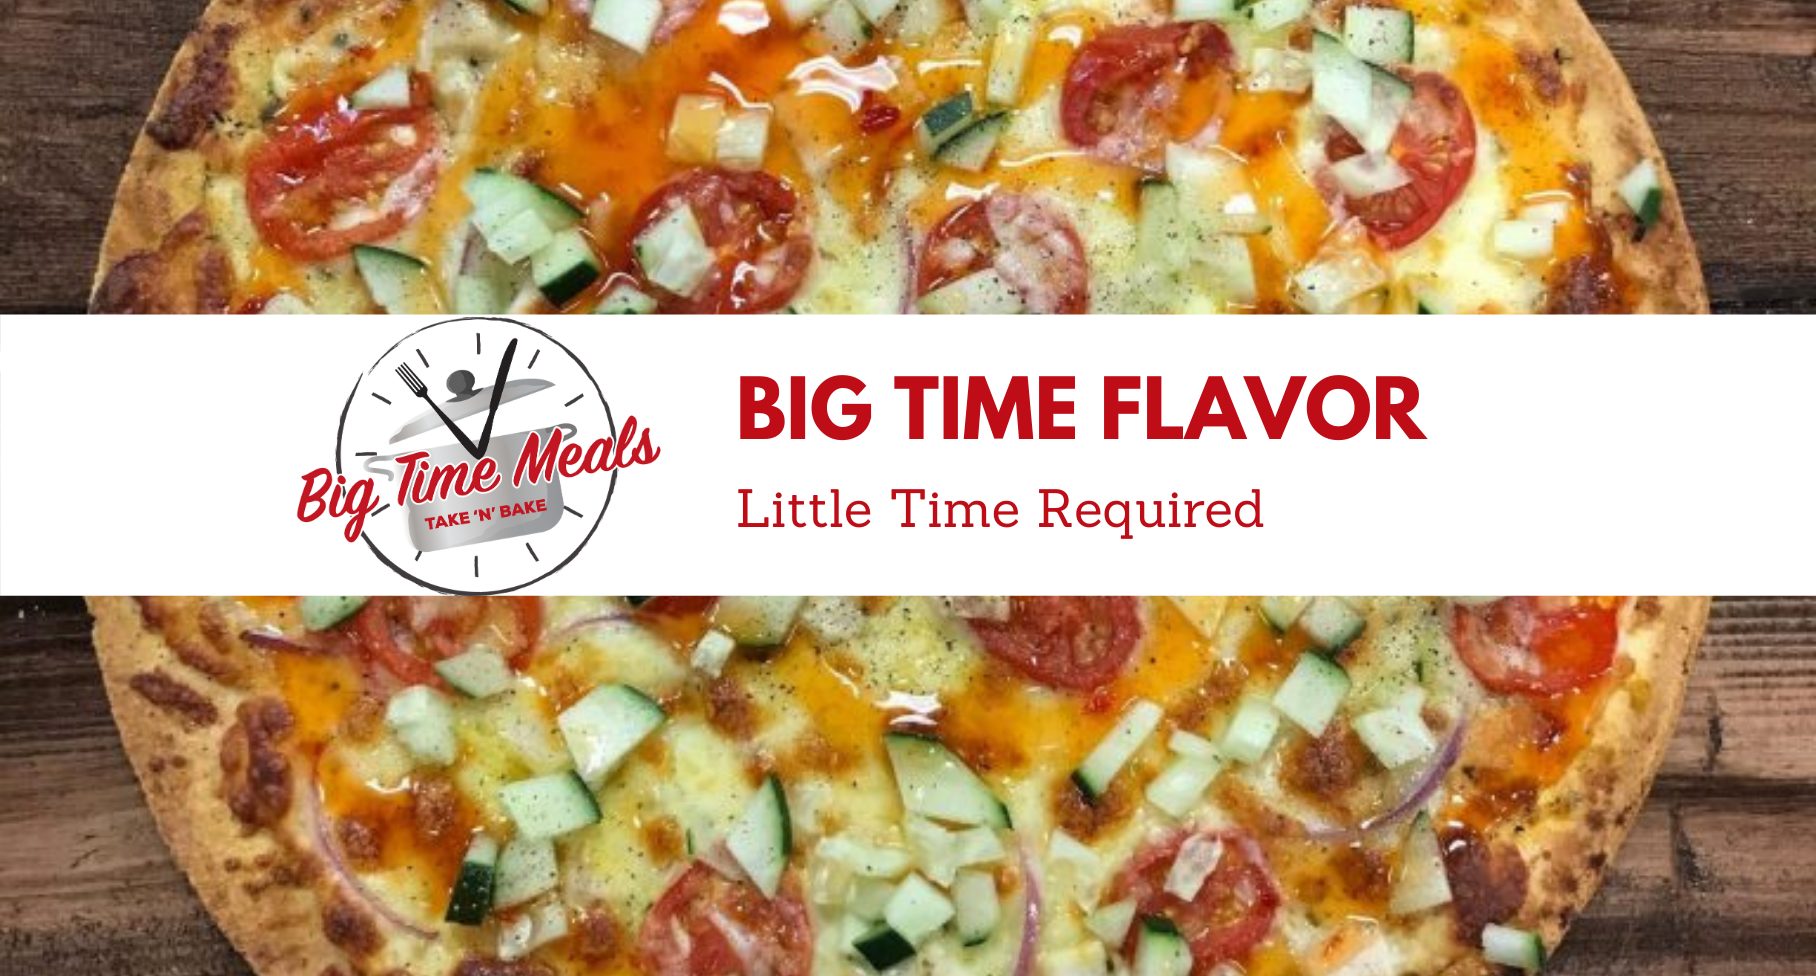 Big Time Meals | Big Time Flavor | Little Time Required